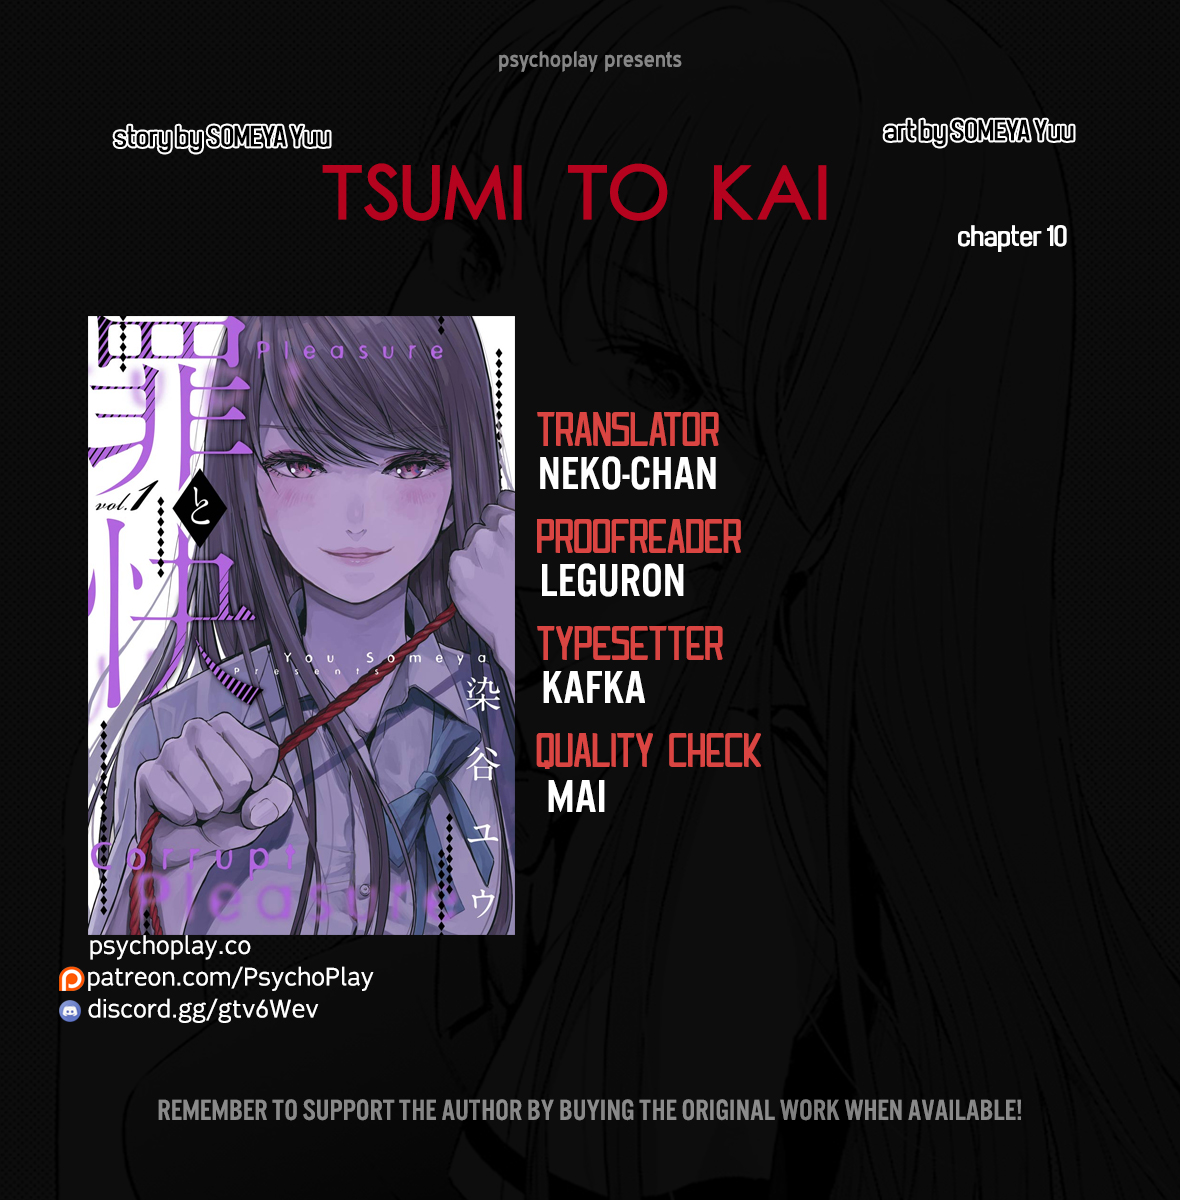 Tsumi to Kai Vol. 2 Ch. 10 Agreement and desire